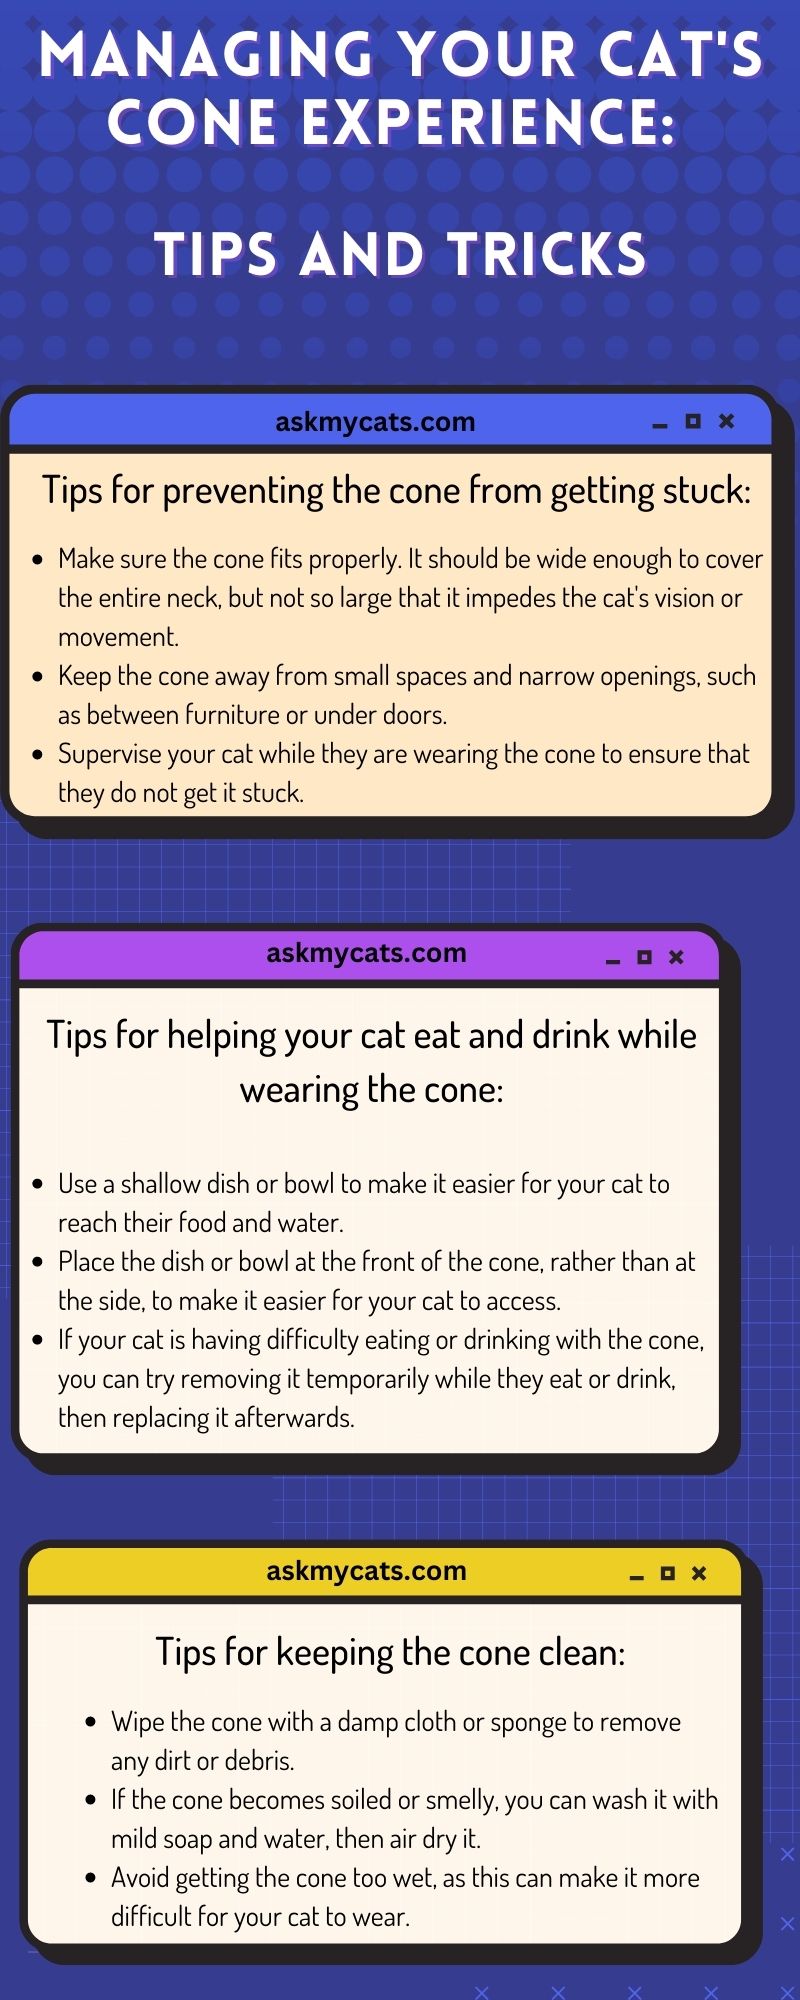 Managing Your Cat's Cone Experience: Tips and Tricks (Infographic)